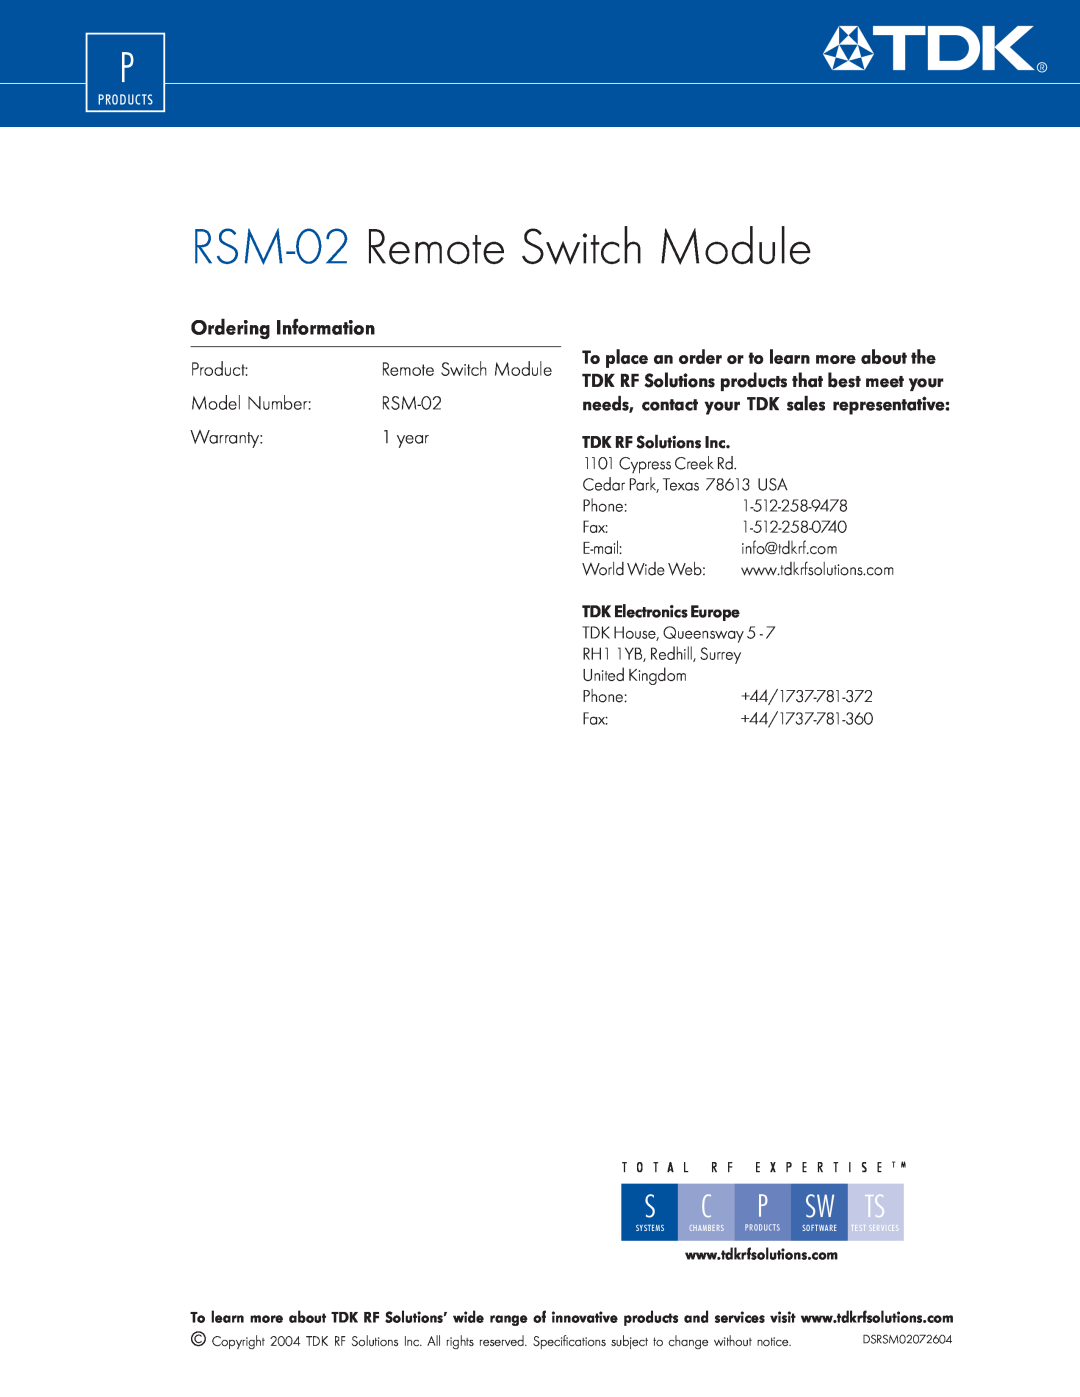 TDK manual Ordering Information, Product, Model Number, Warranty, year, RSM-02 Remote Switch Module 